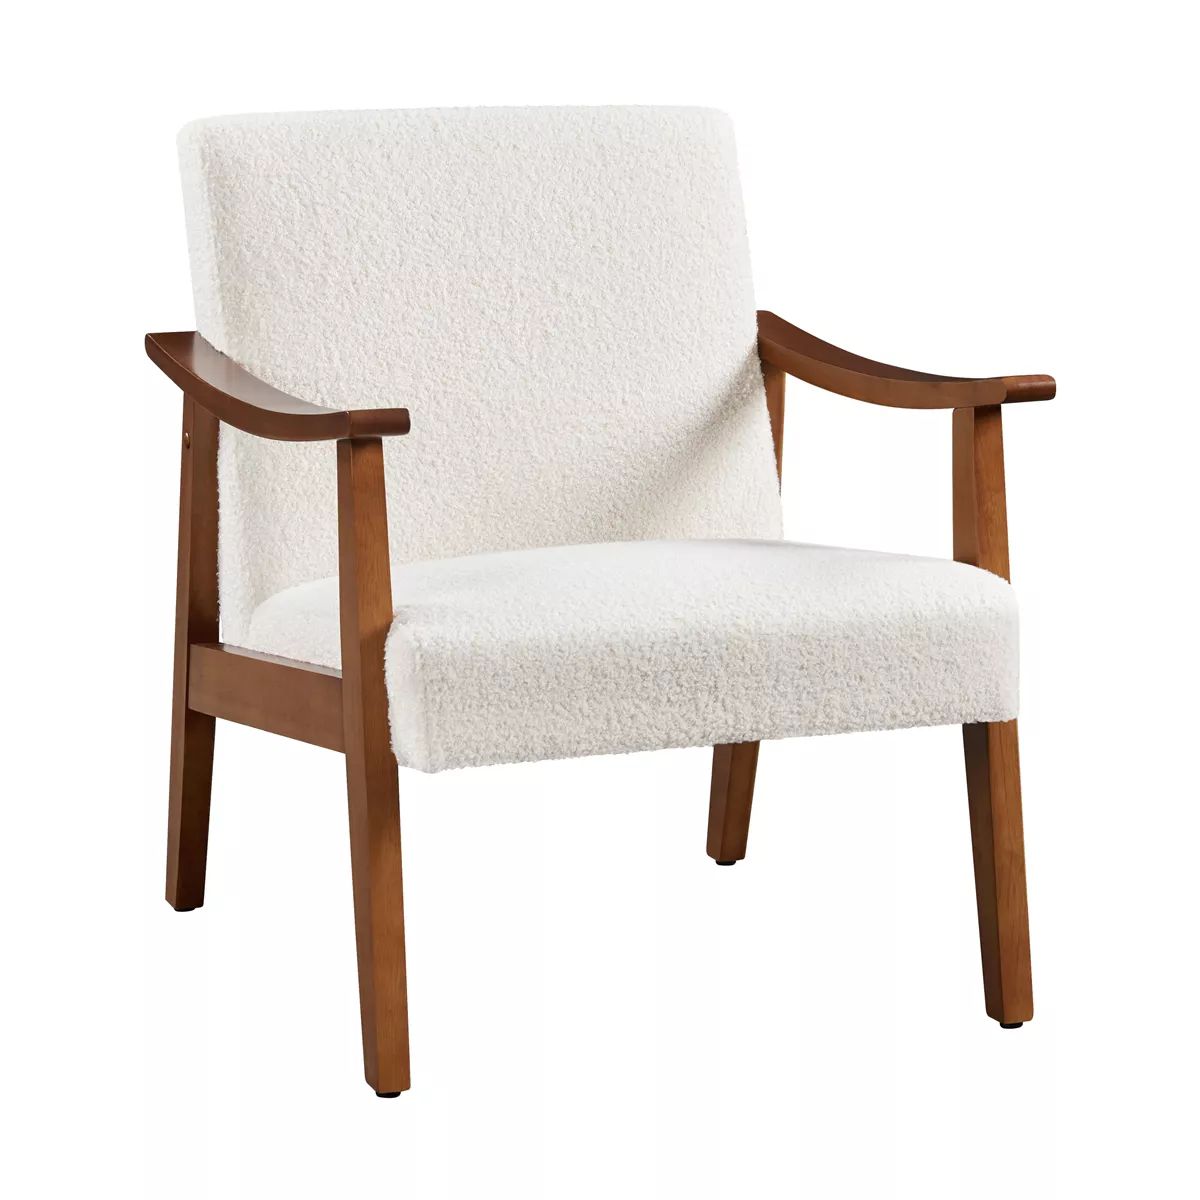 Yaheetech Modern Faux Leather Upholstered Armchair Accent Chair with Solid Wood Legs | Target